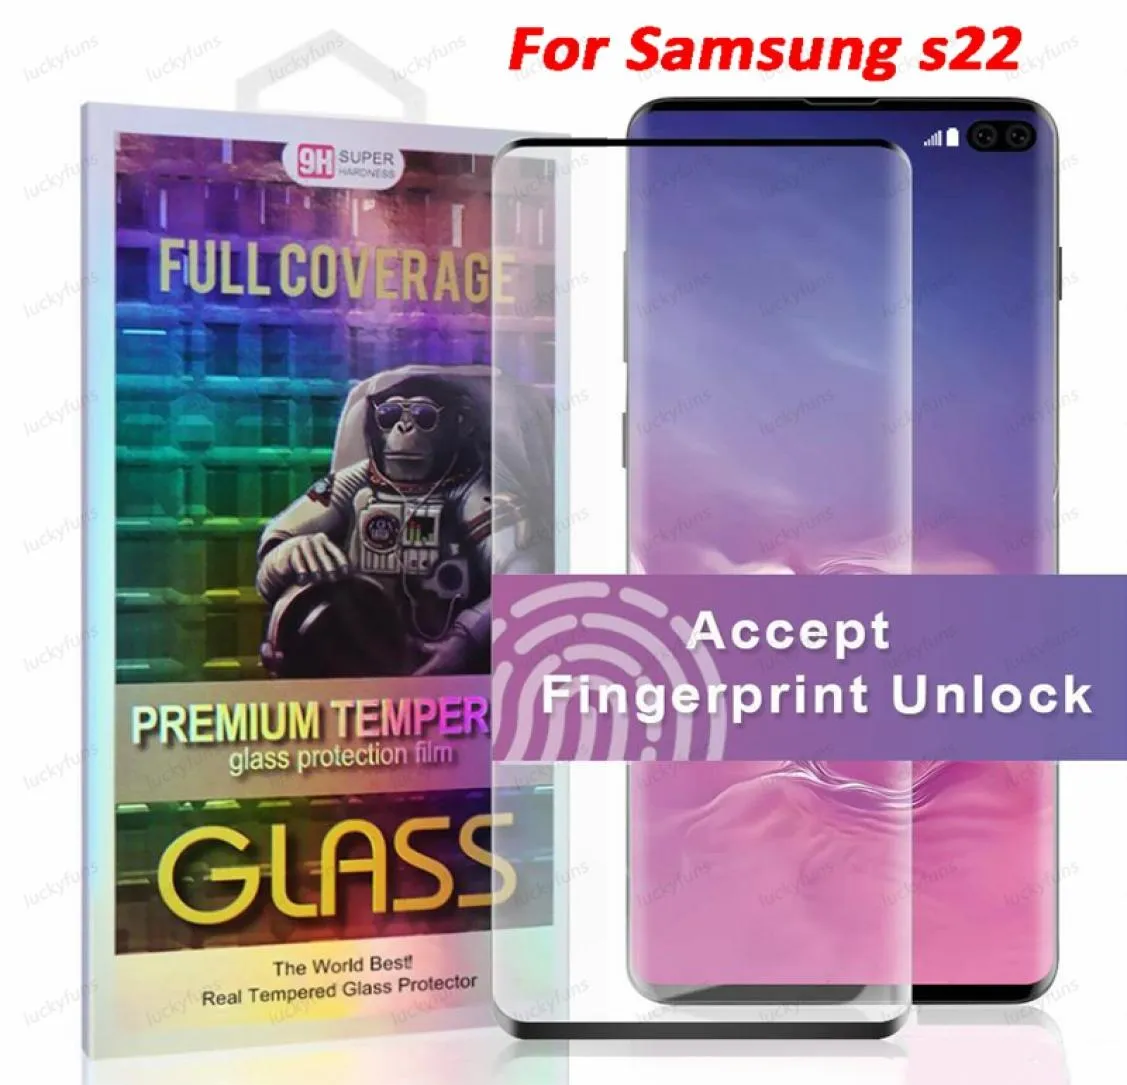 Samsung Galaxy S22 S20 S21 Note20 Ultra S10 S9 S8 Plus Tempered Glass Case Friendly Steel Film Edge6204431の3D曲線プロテクタープロテクター